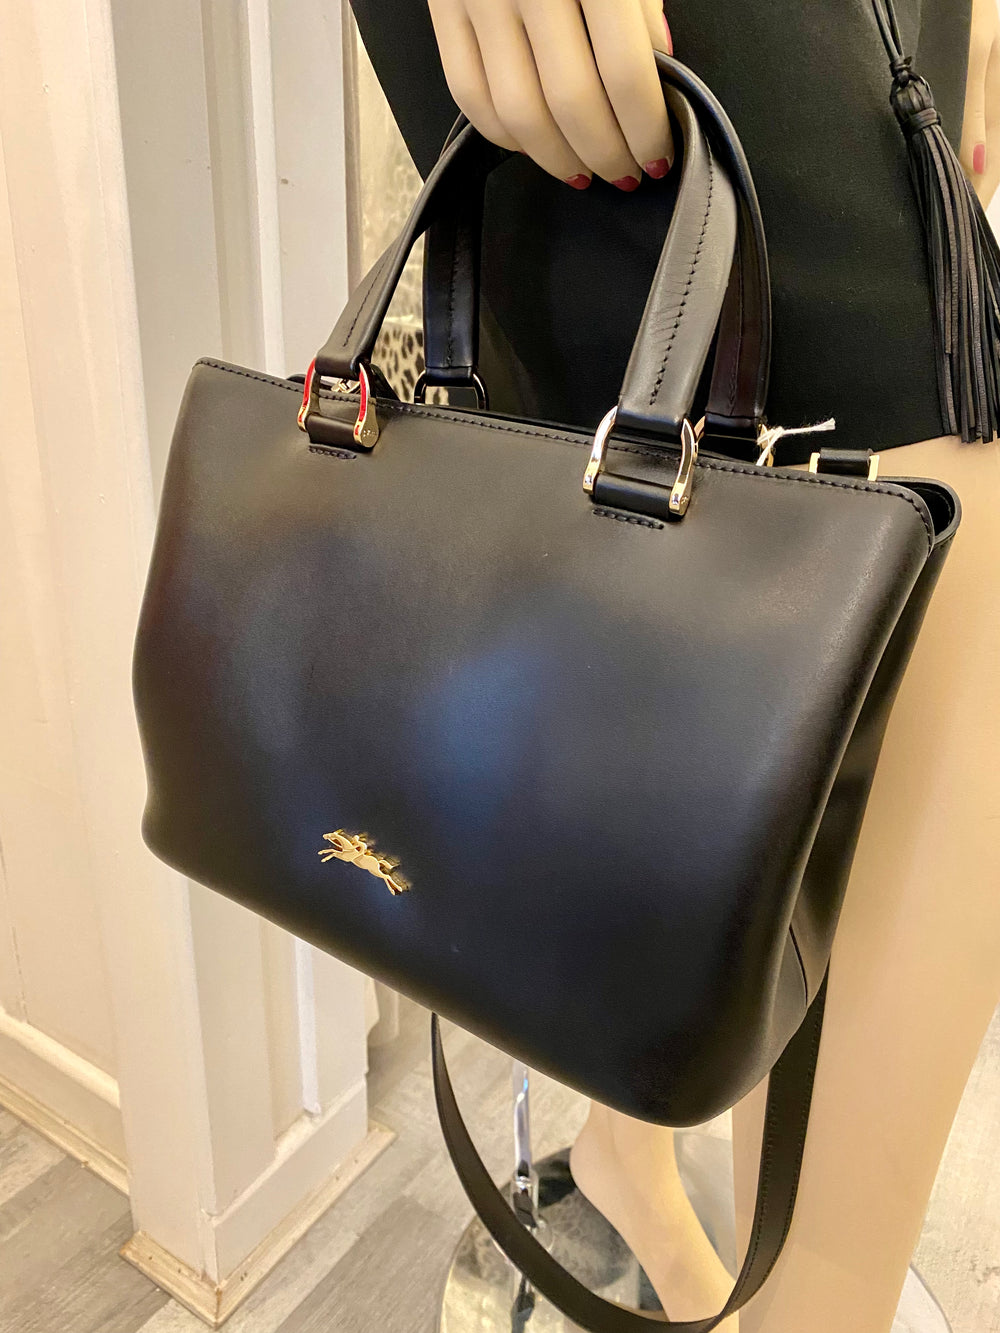 Longchamp Black leather Tote  (as new)